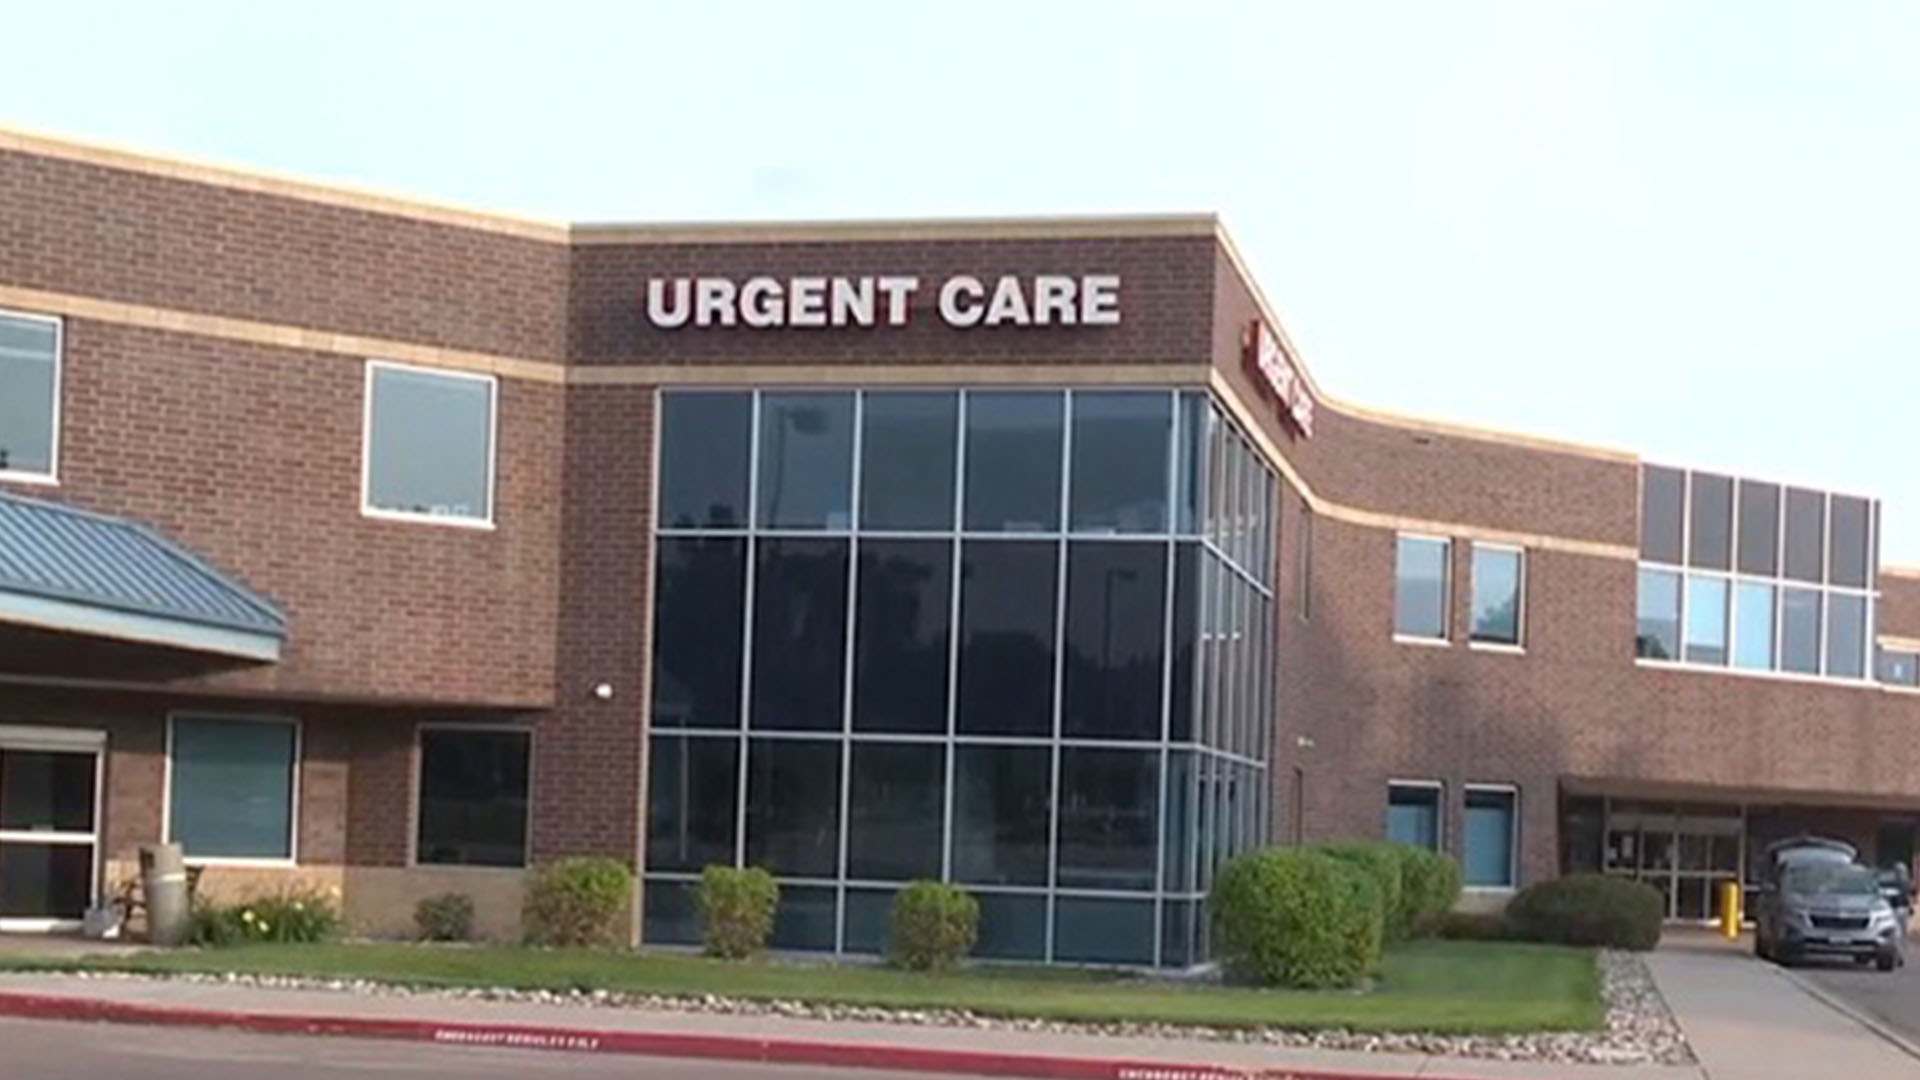 Urgent care clinic abruptly closes multiple locations – patients learned after sign was left on door [Video]